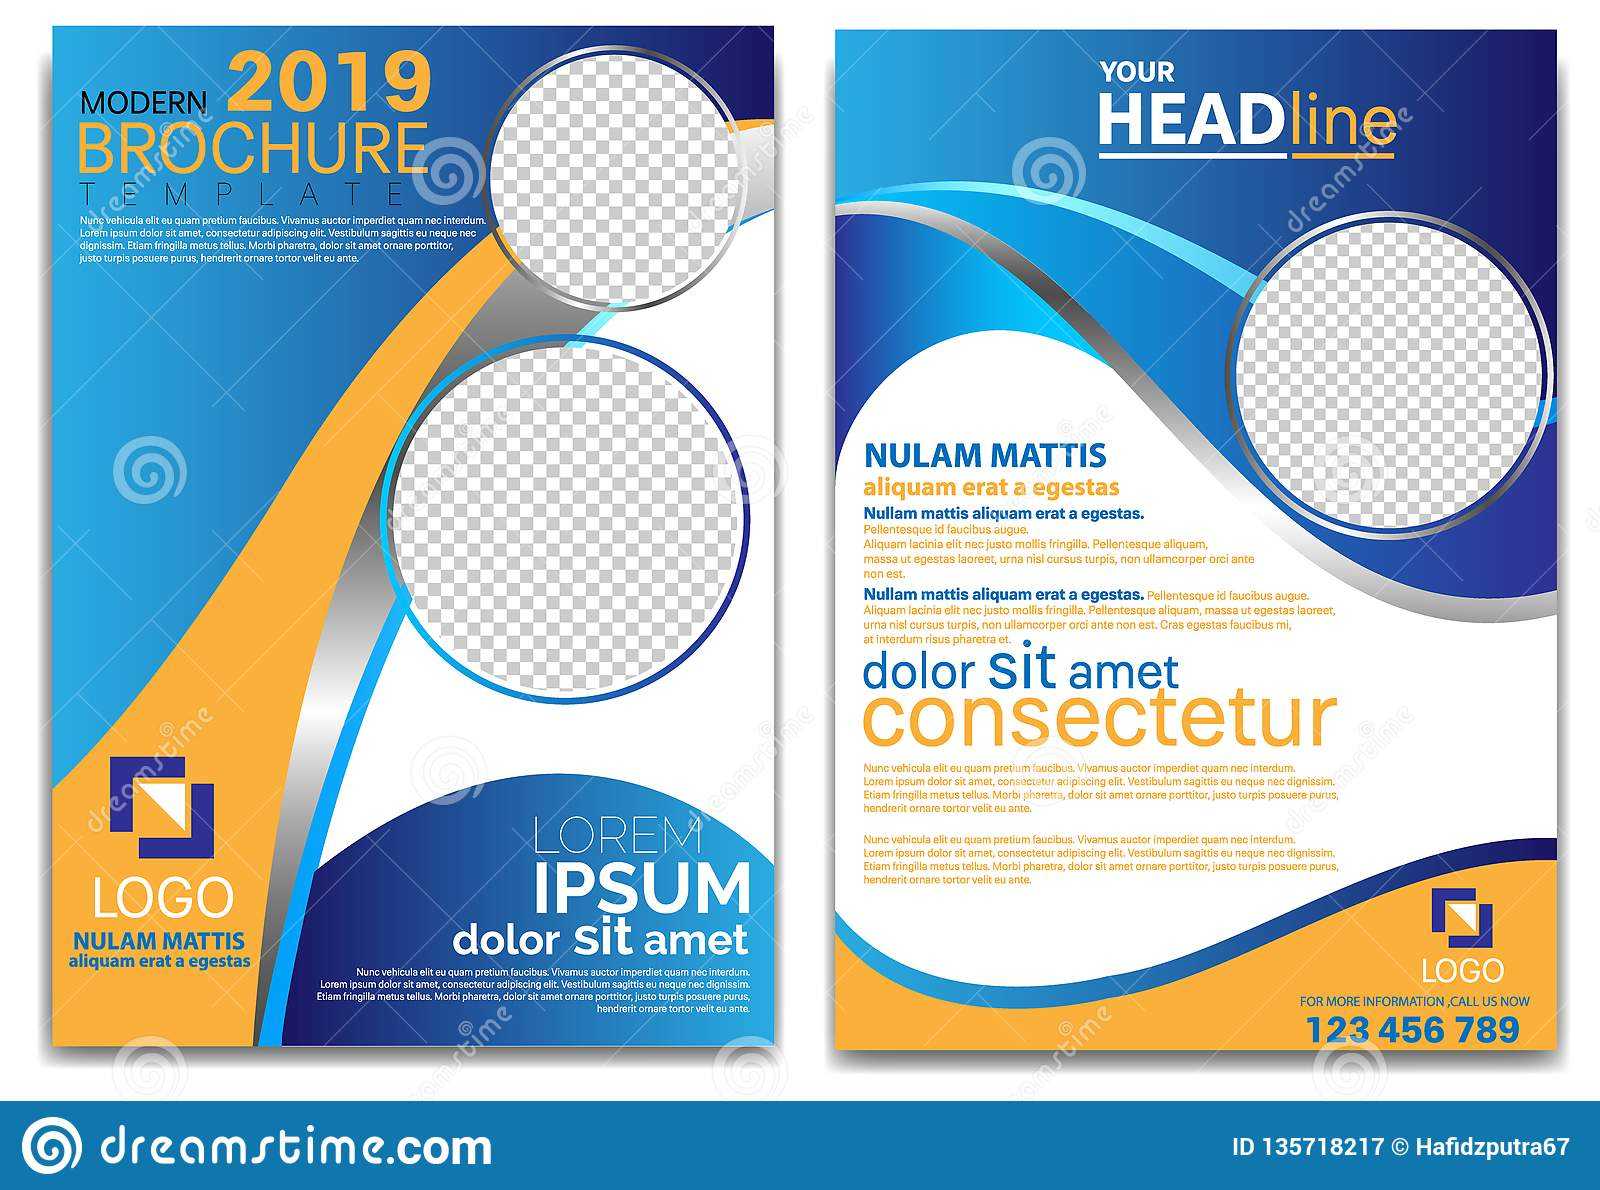 Modern Brochure Template 2019 And Professional Brochure Intended For Professional Brochure Design Templates